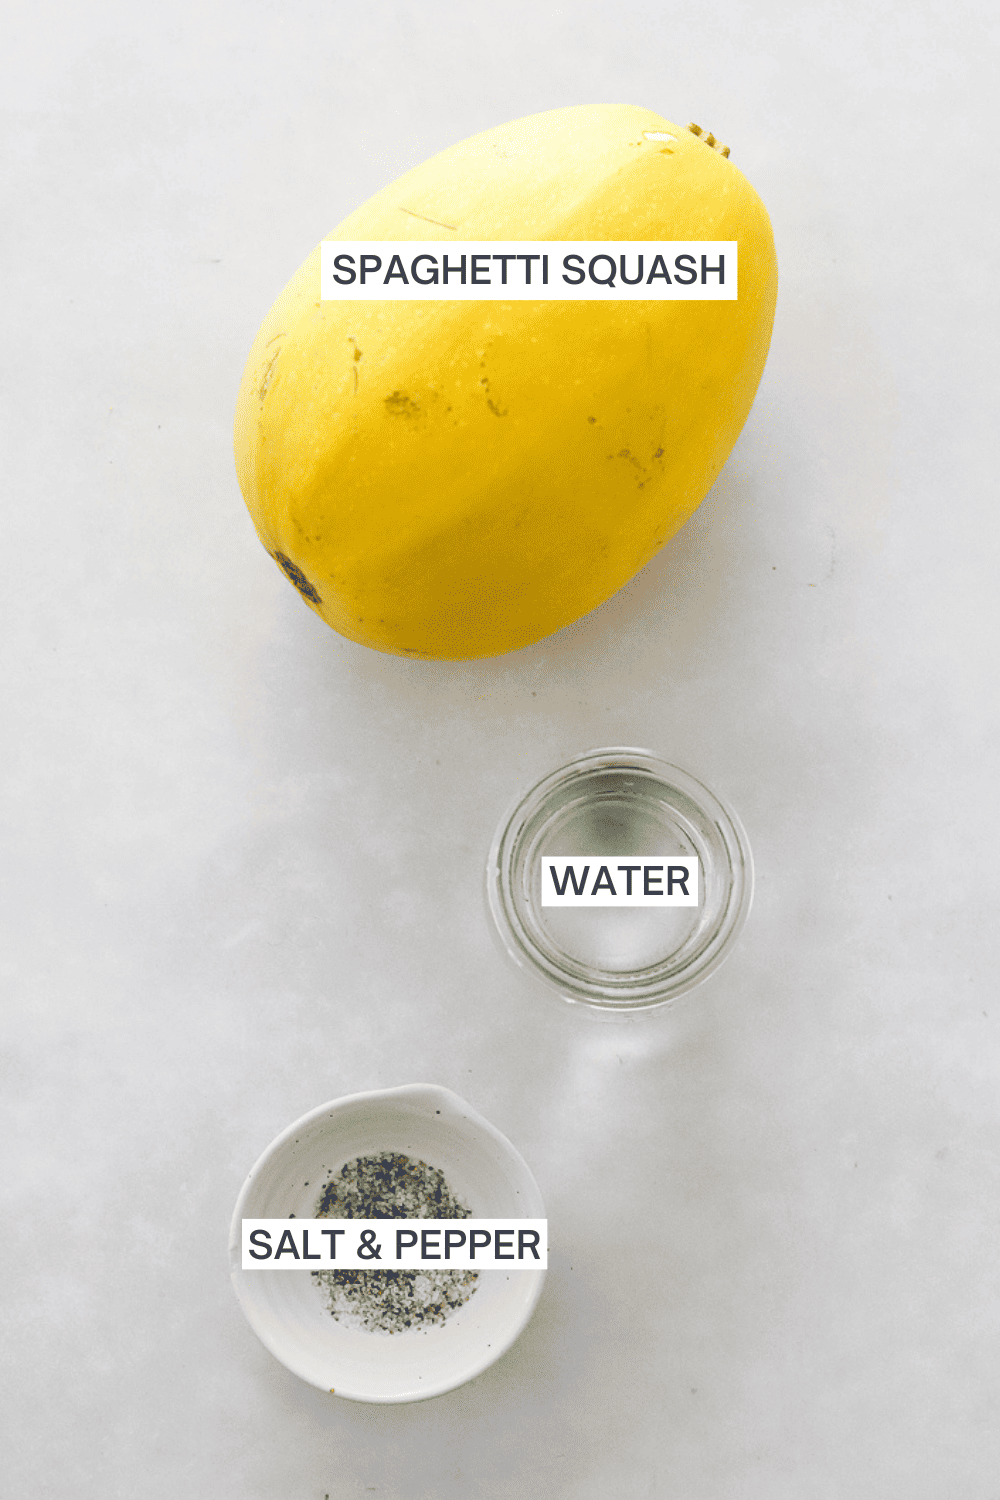 Ingredients for microwave spaghetti squash with labels over each ingredient.